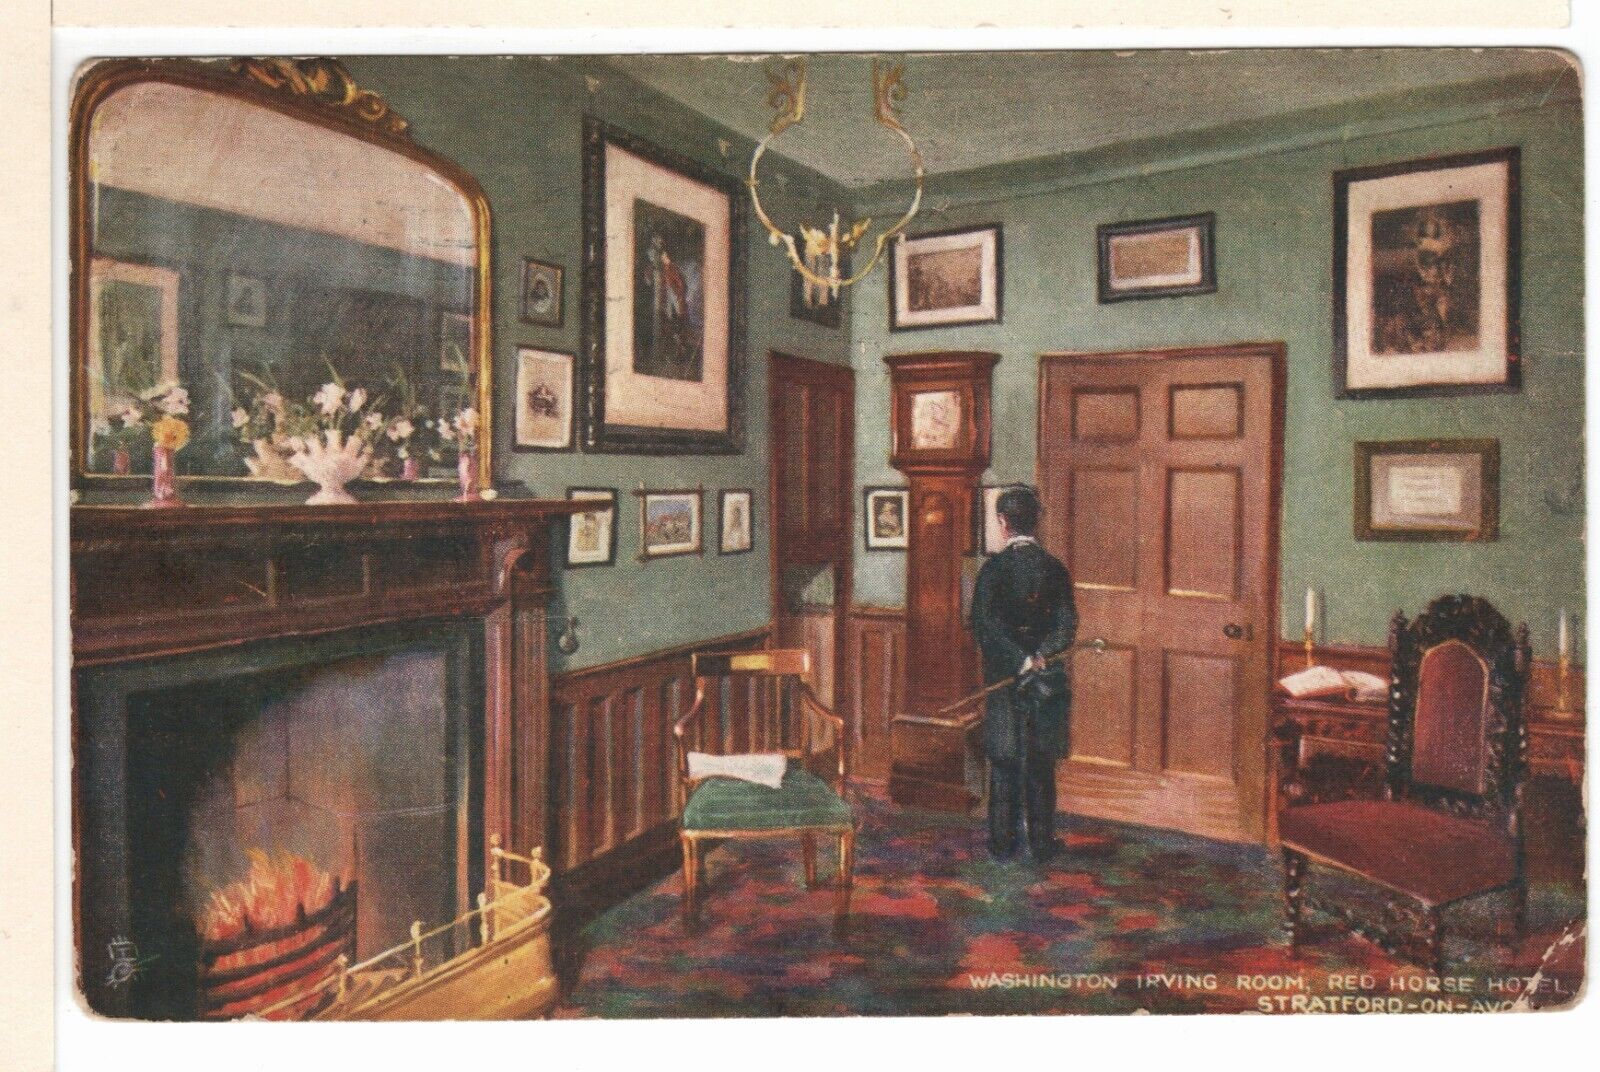 1907 Tuck’s Postcard #7179 Washington Irving Room Red House Hotel Posted-VP2